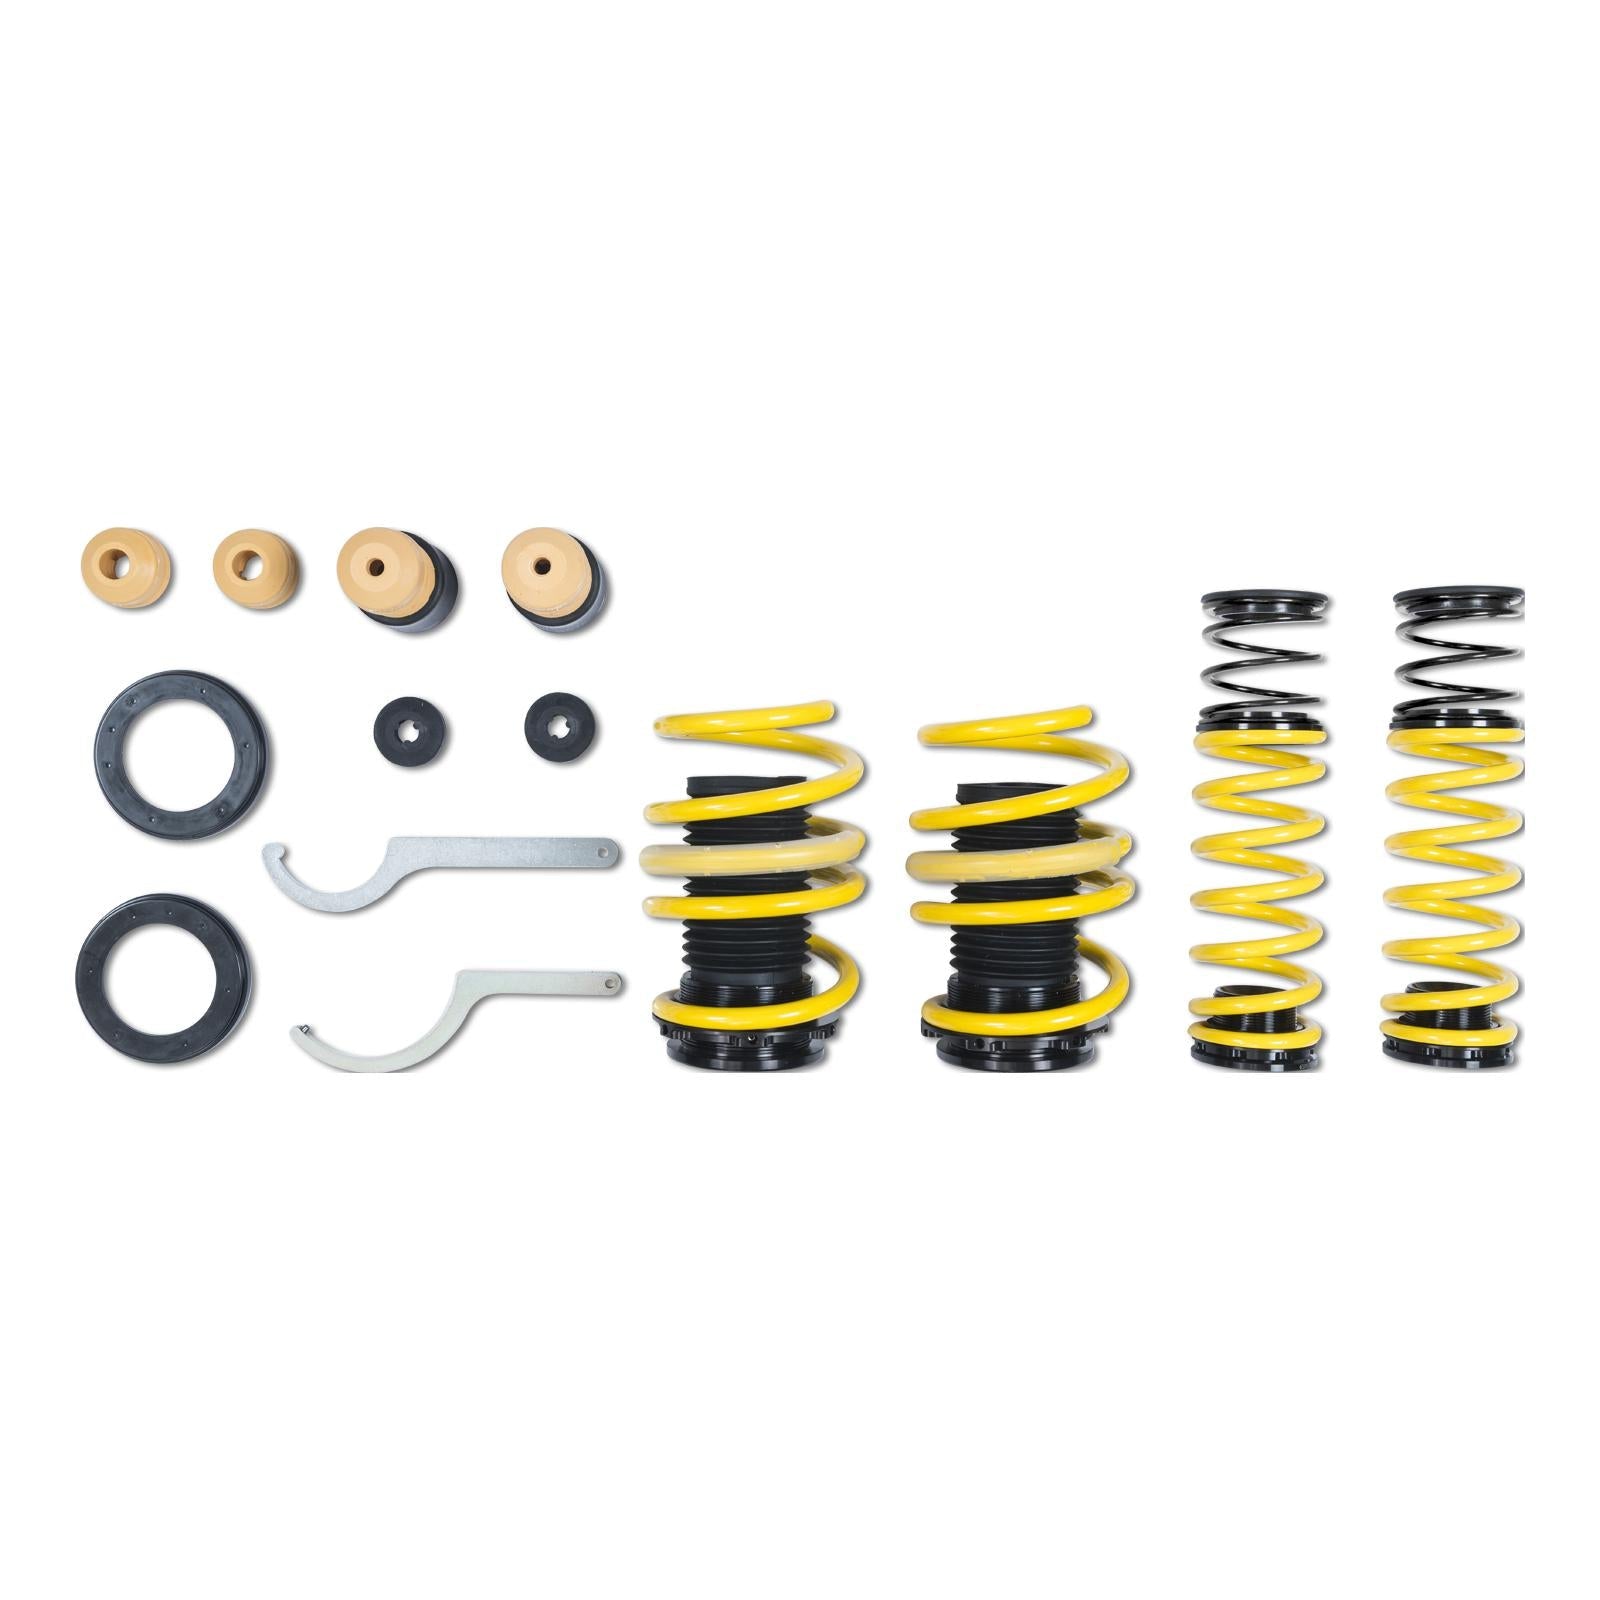 ST Suspensions Adjustable Lowering Springs - BMW F15 X5 xDrive With Electronic Dampers And Air Suspension Rear